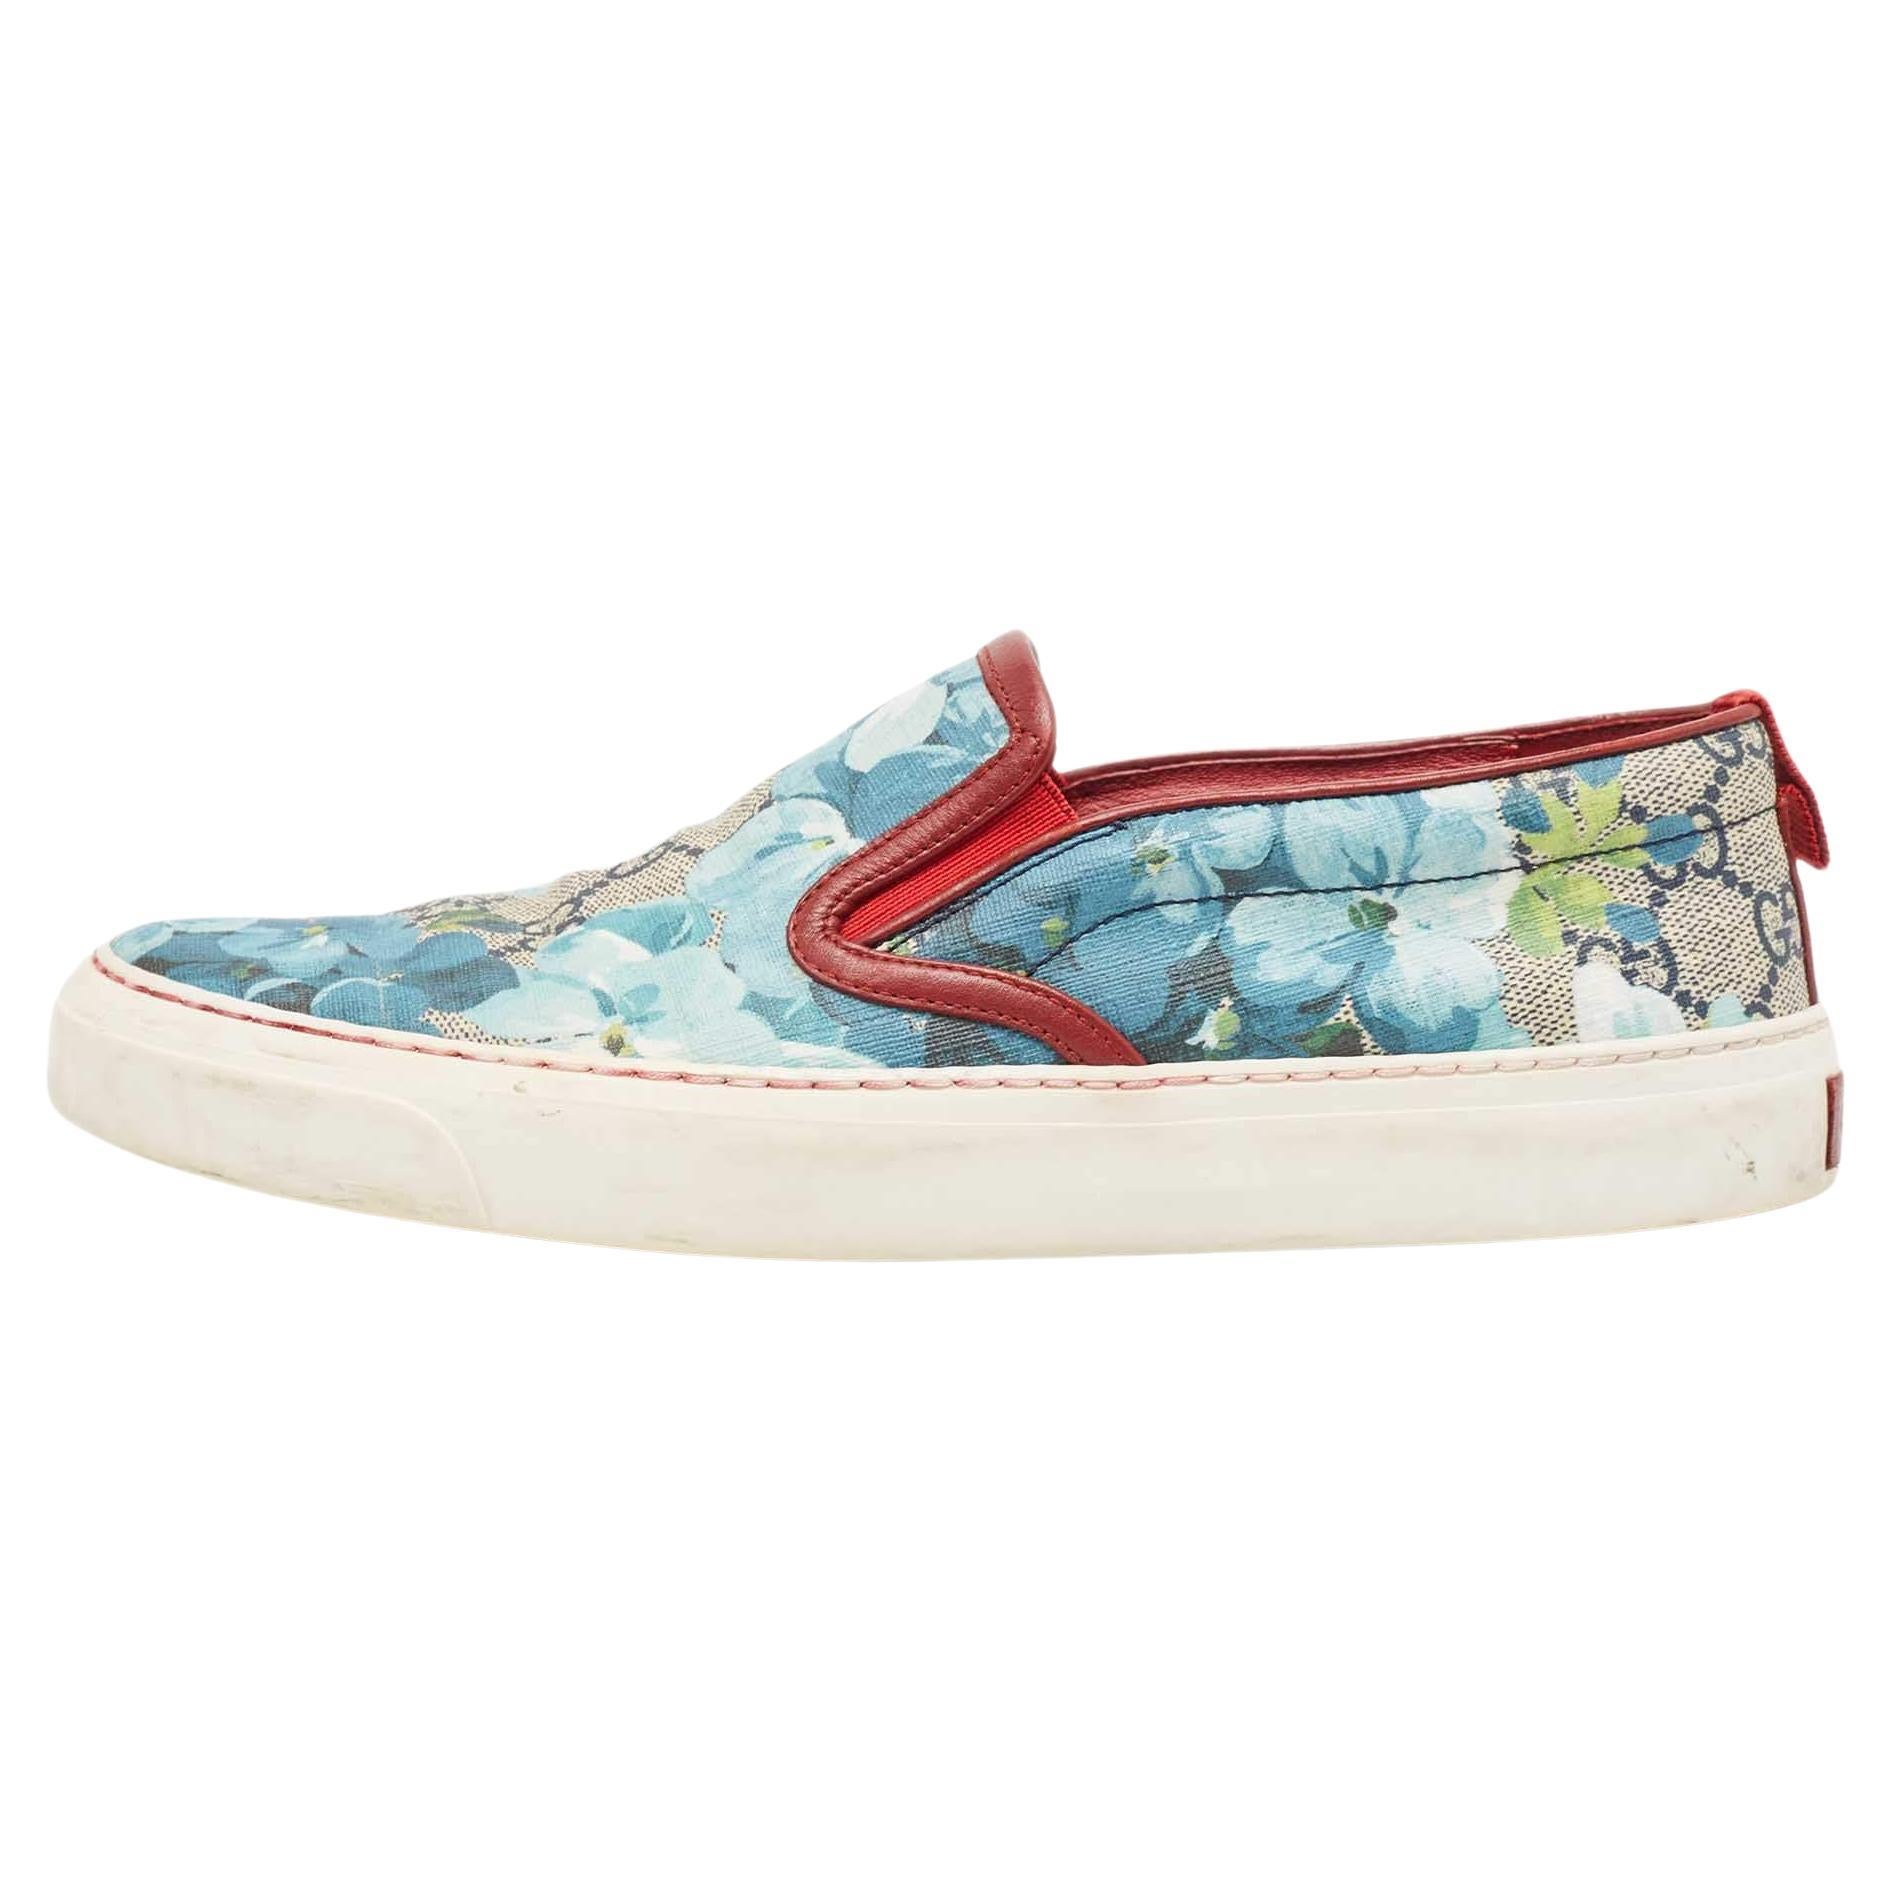 Gucci Multicolor GG Supreme Blooms Printed Canvas Slip On Sneakers Size 37.5 For Sale